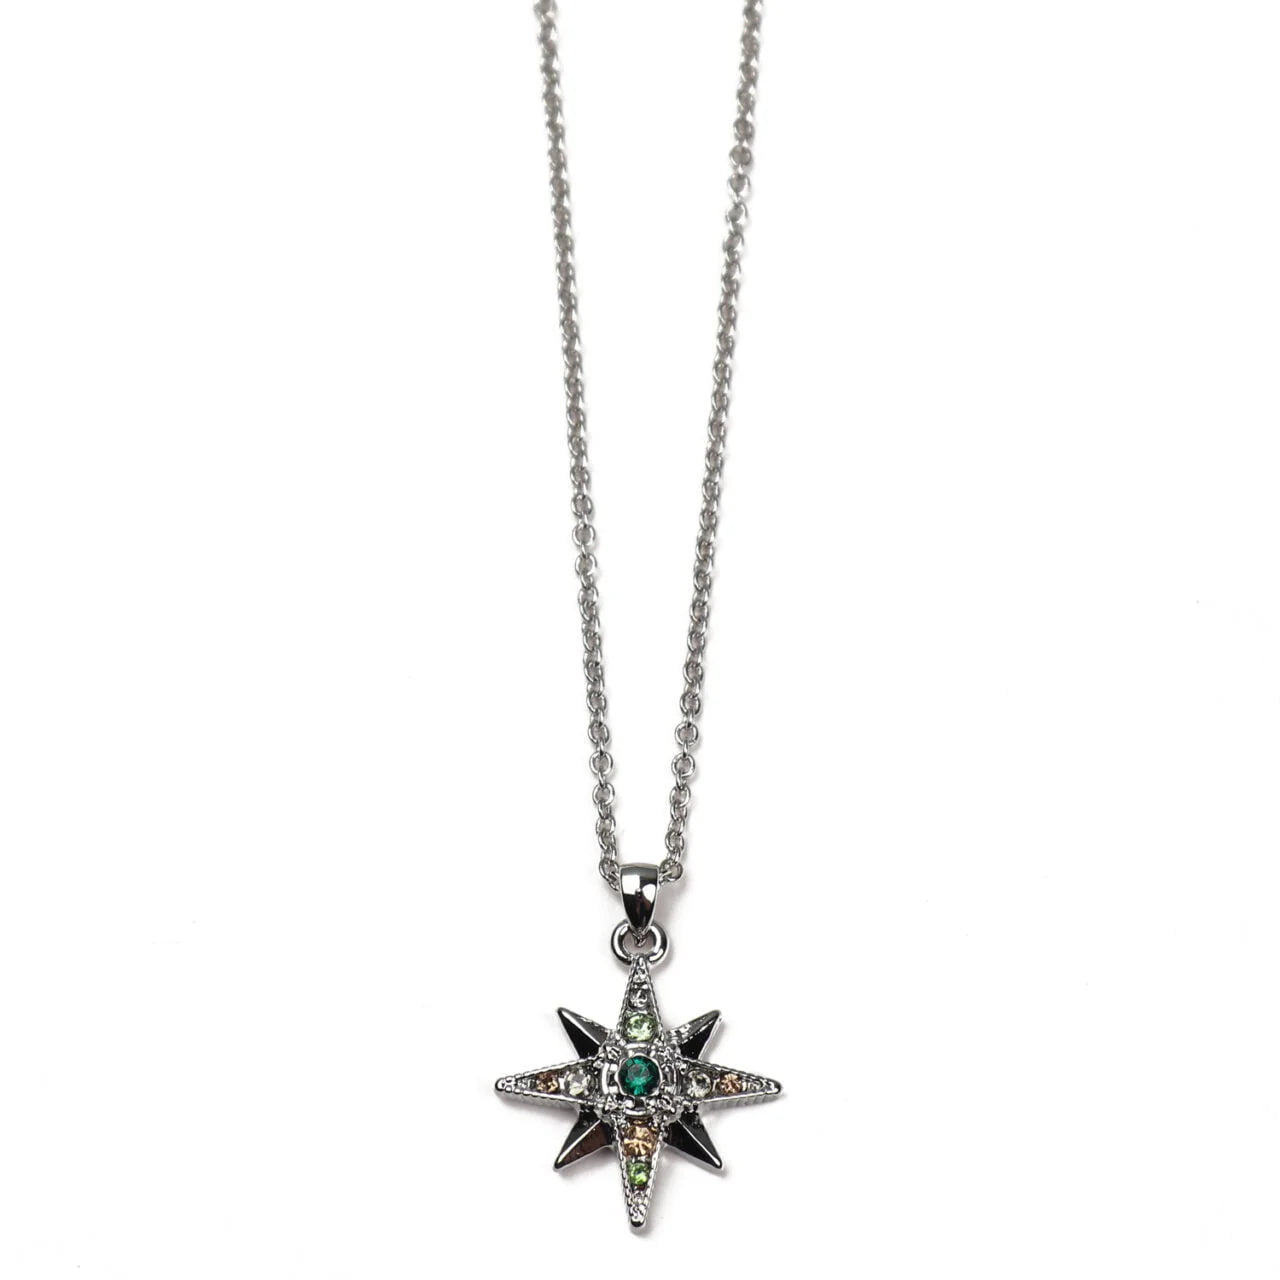 Fabulous Gifts Jewellery Necklace Star Green Silver by Weirs of Baggot Street